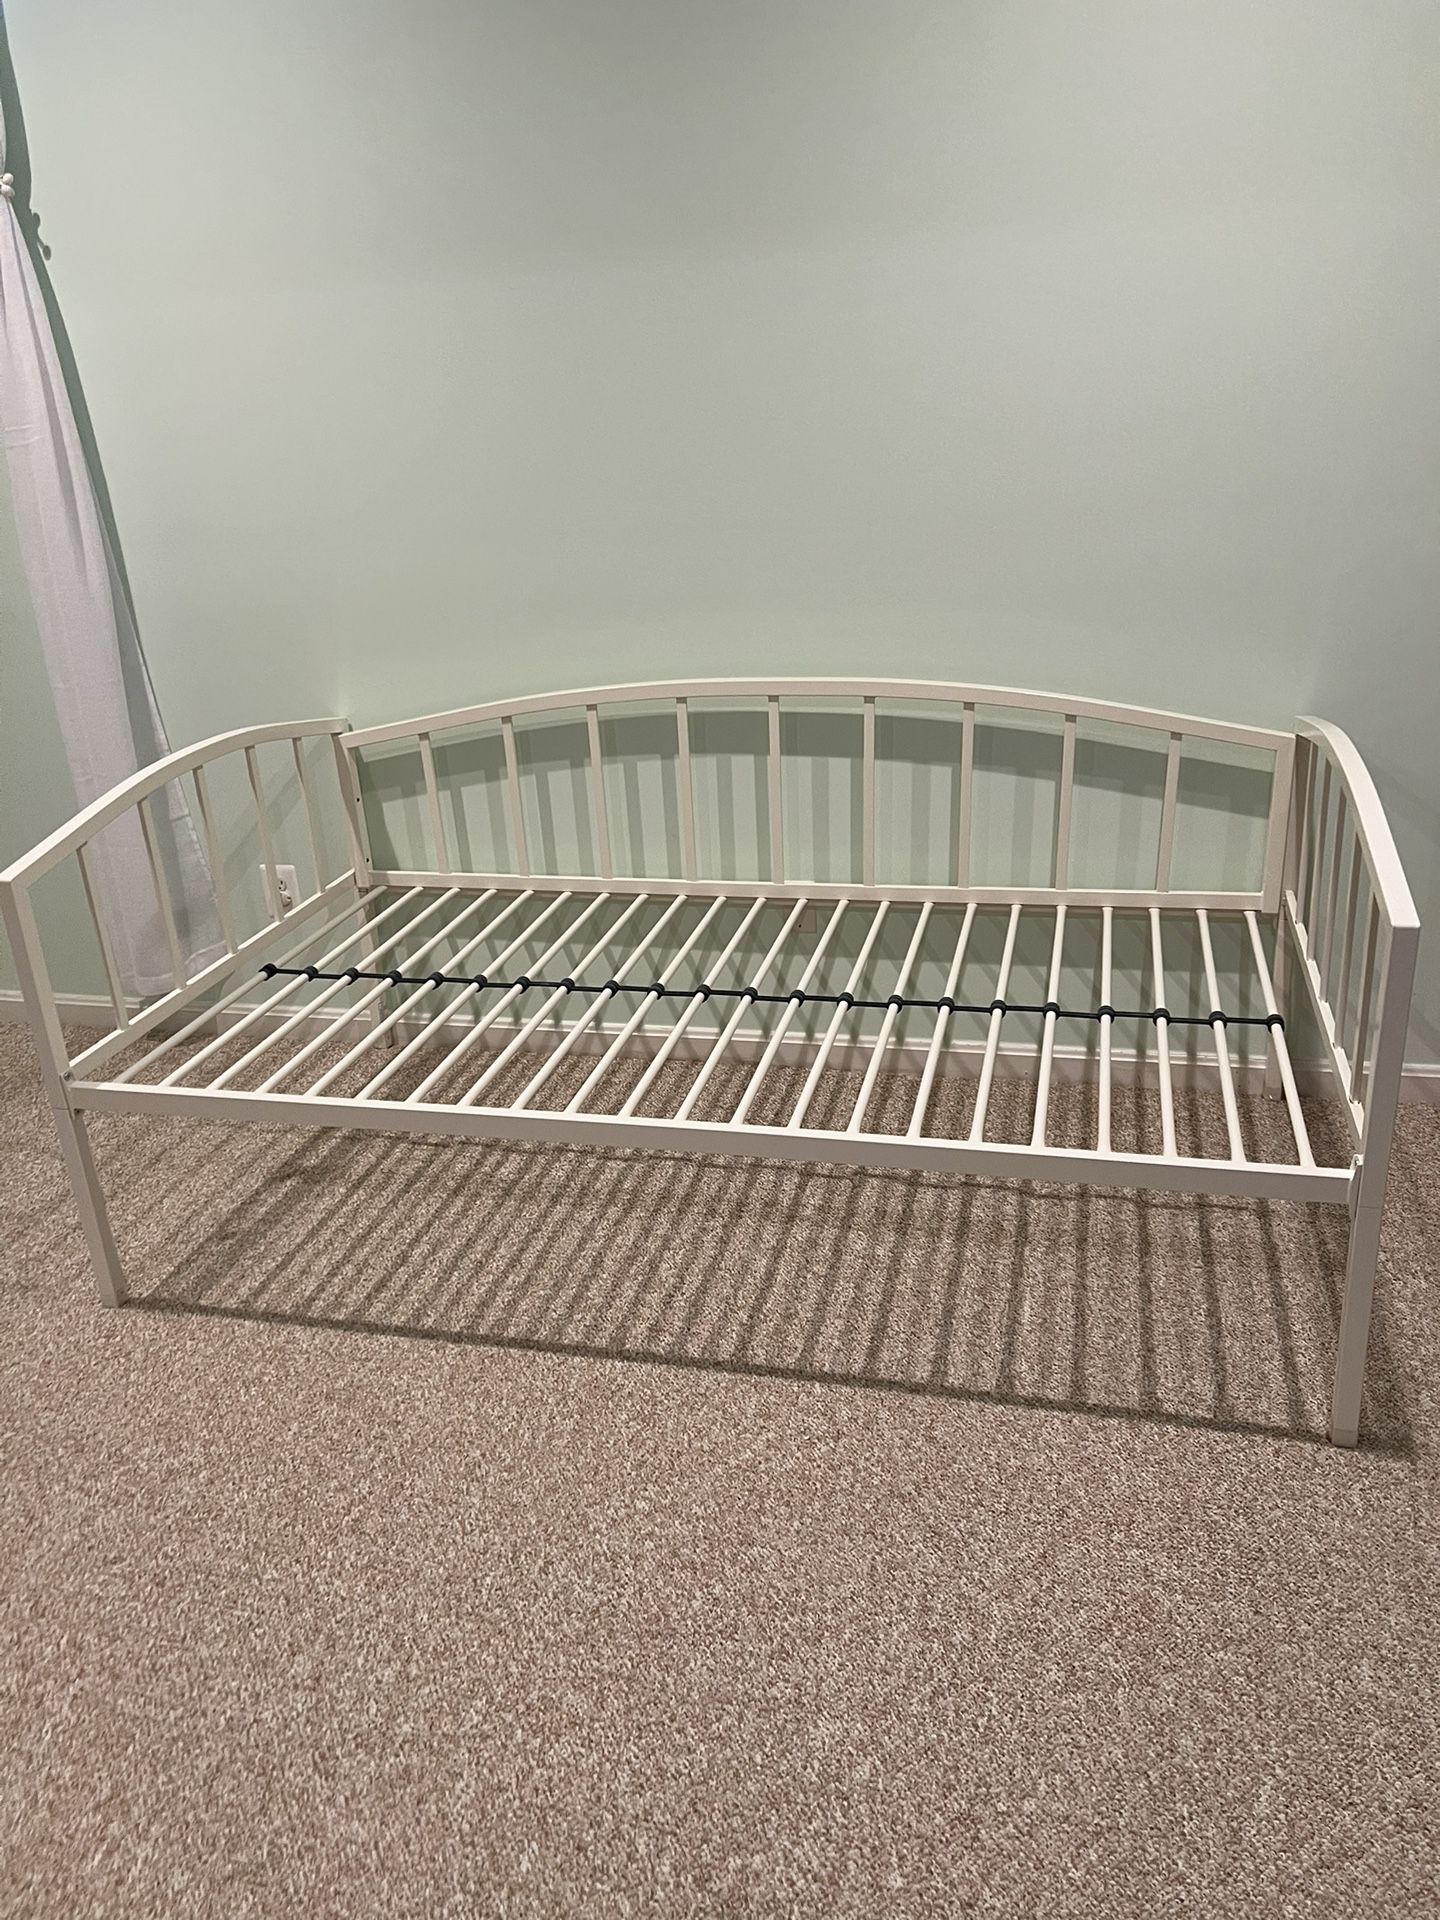 Twin day bed frame